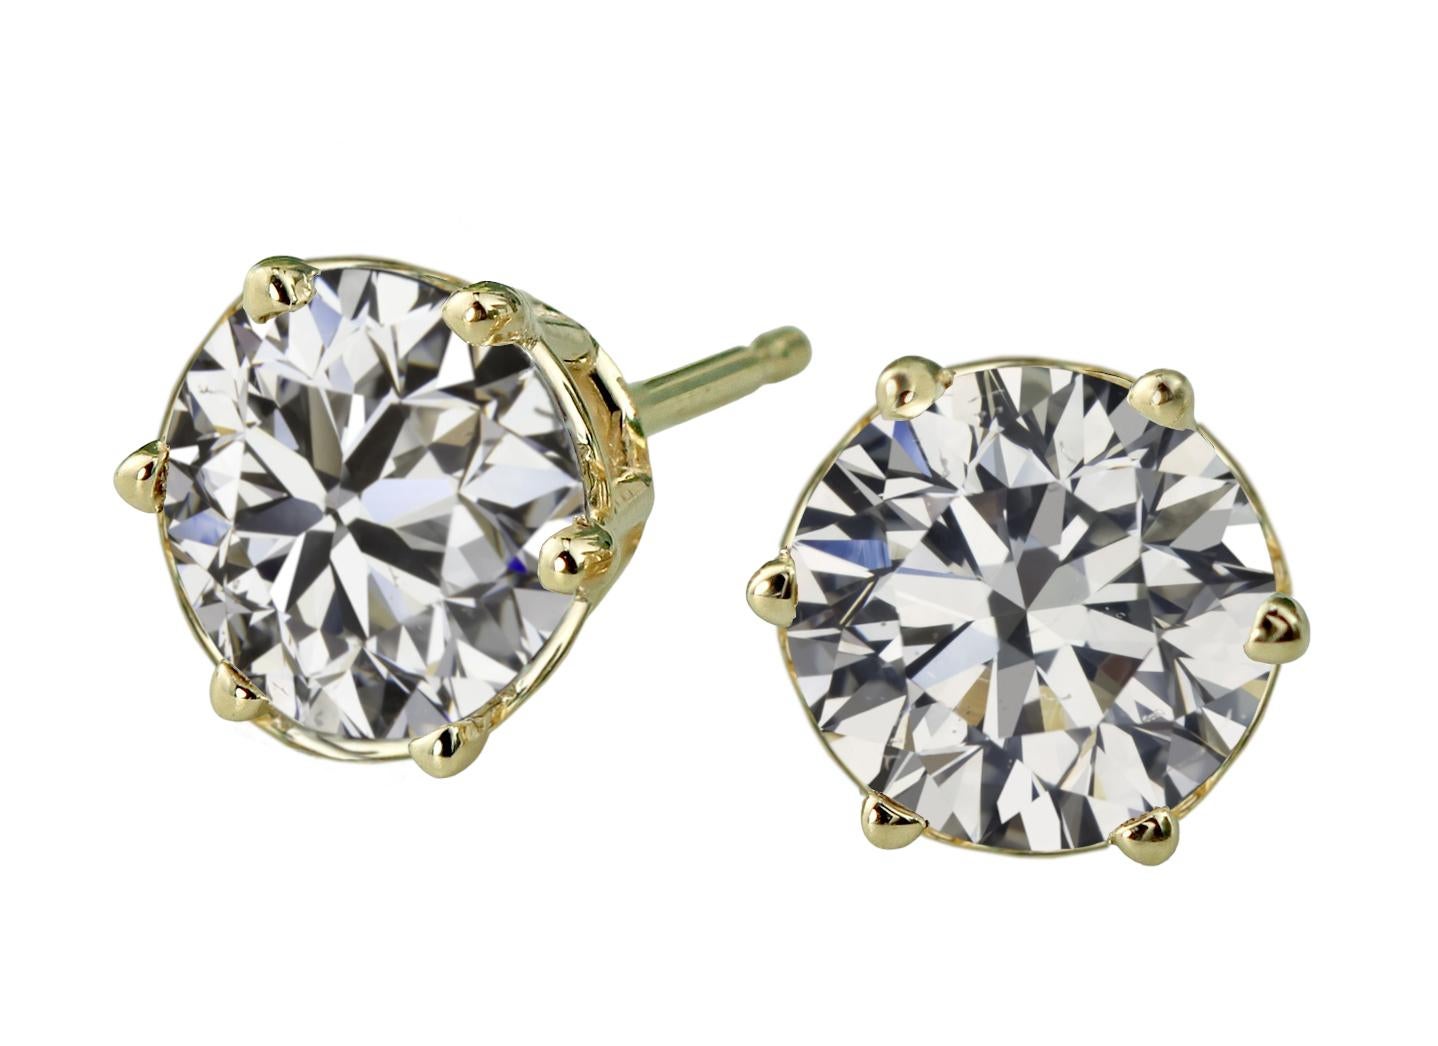 An exquisite pair of 18 carat yellow gold diamond studs
the mounting is customizable